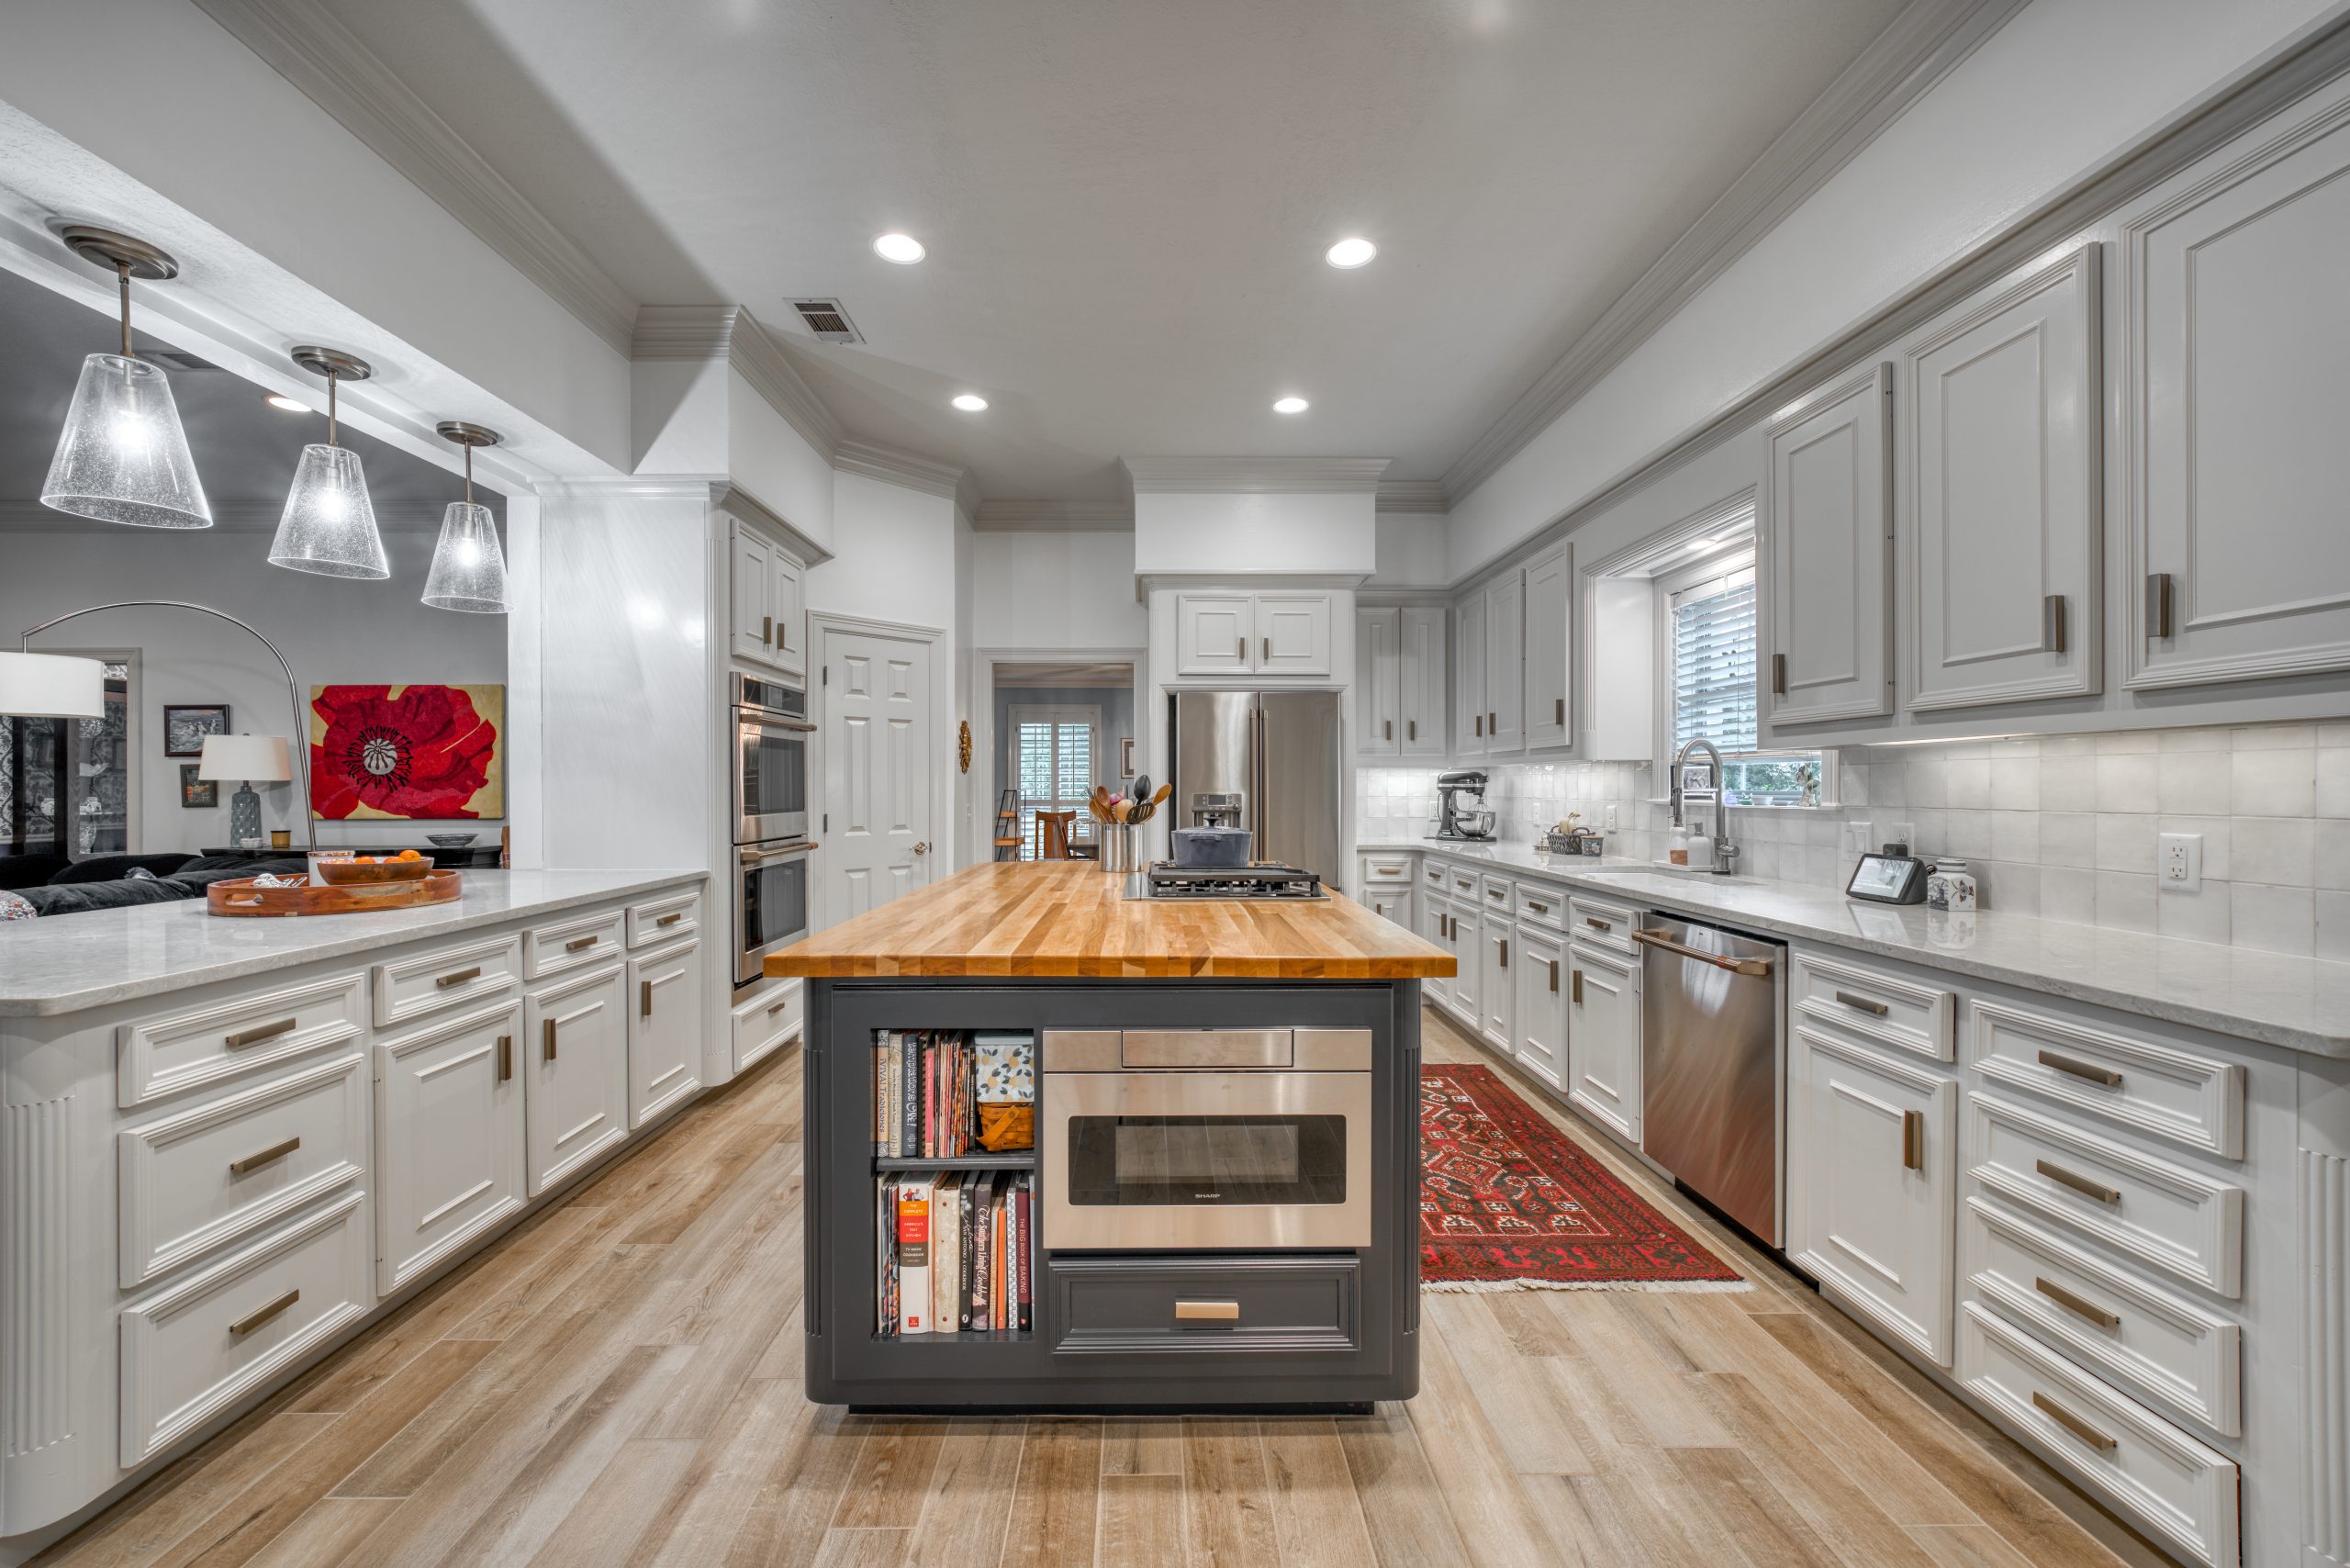 Good Company Construction in Bryan, Texas - Image of Kitchen remodel butcher block